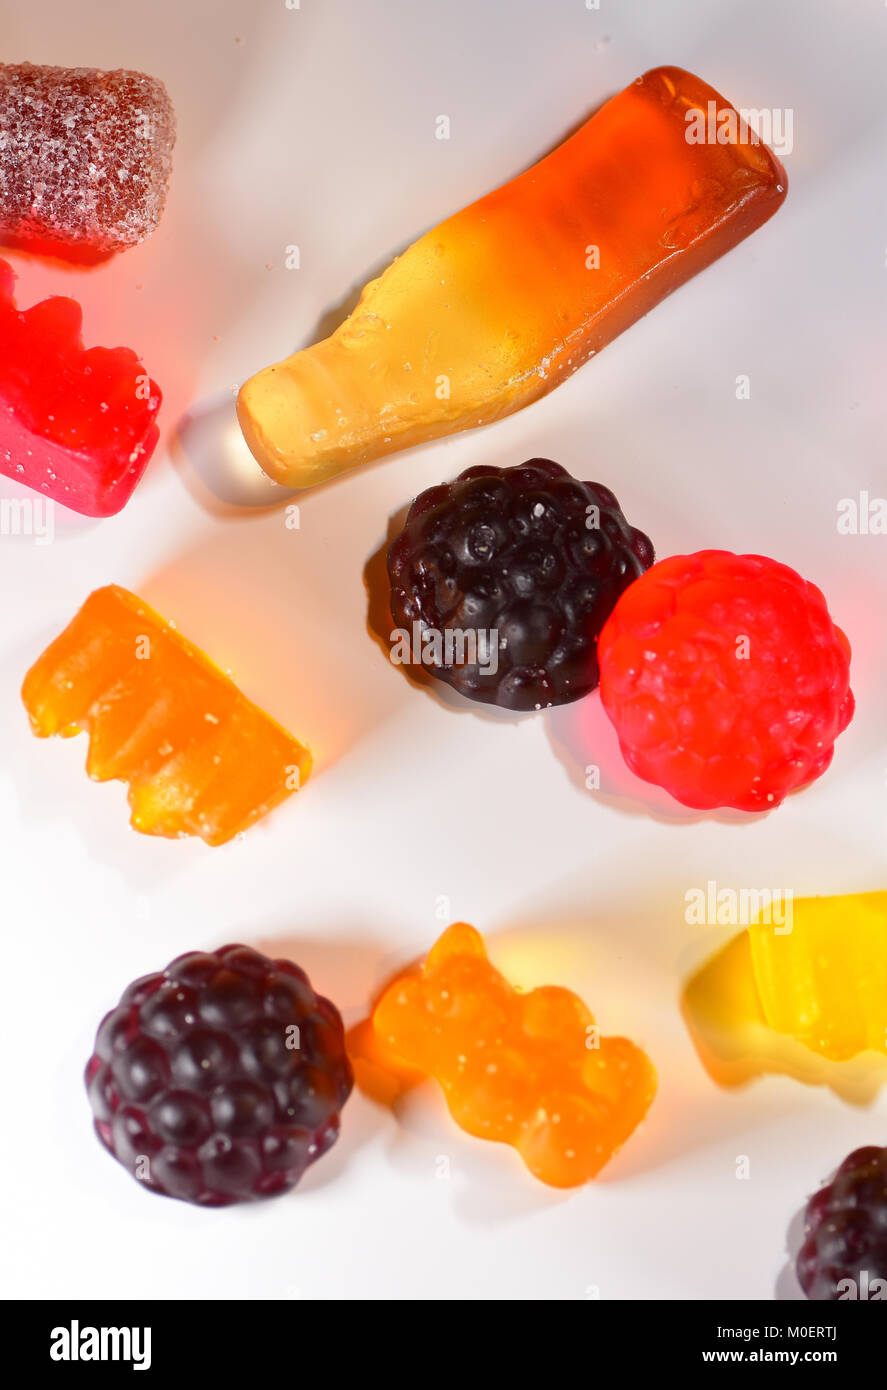 Pick and Mix sweets Stock Photo